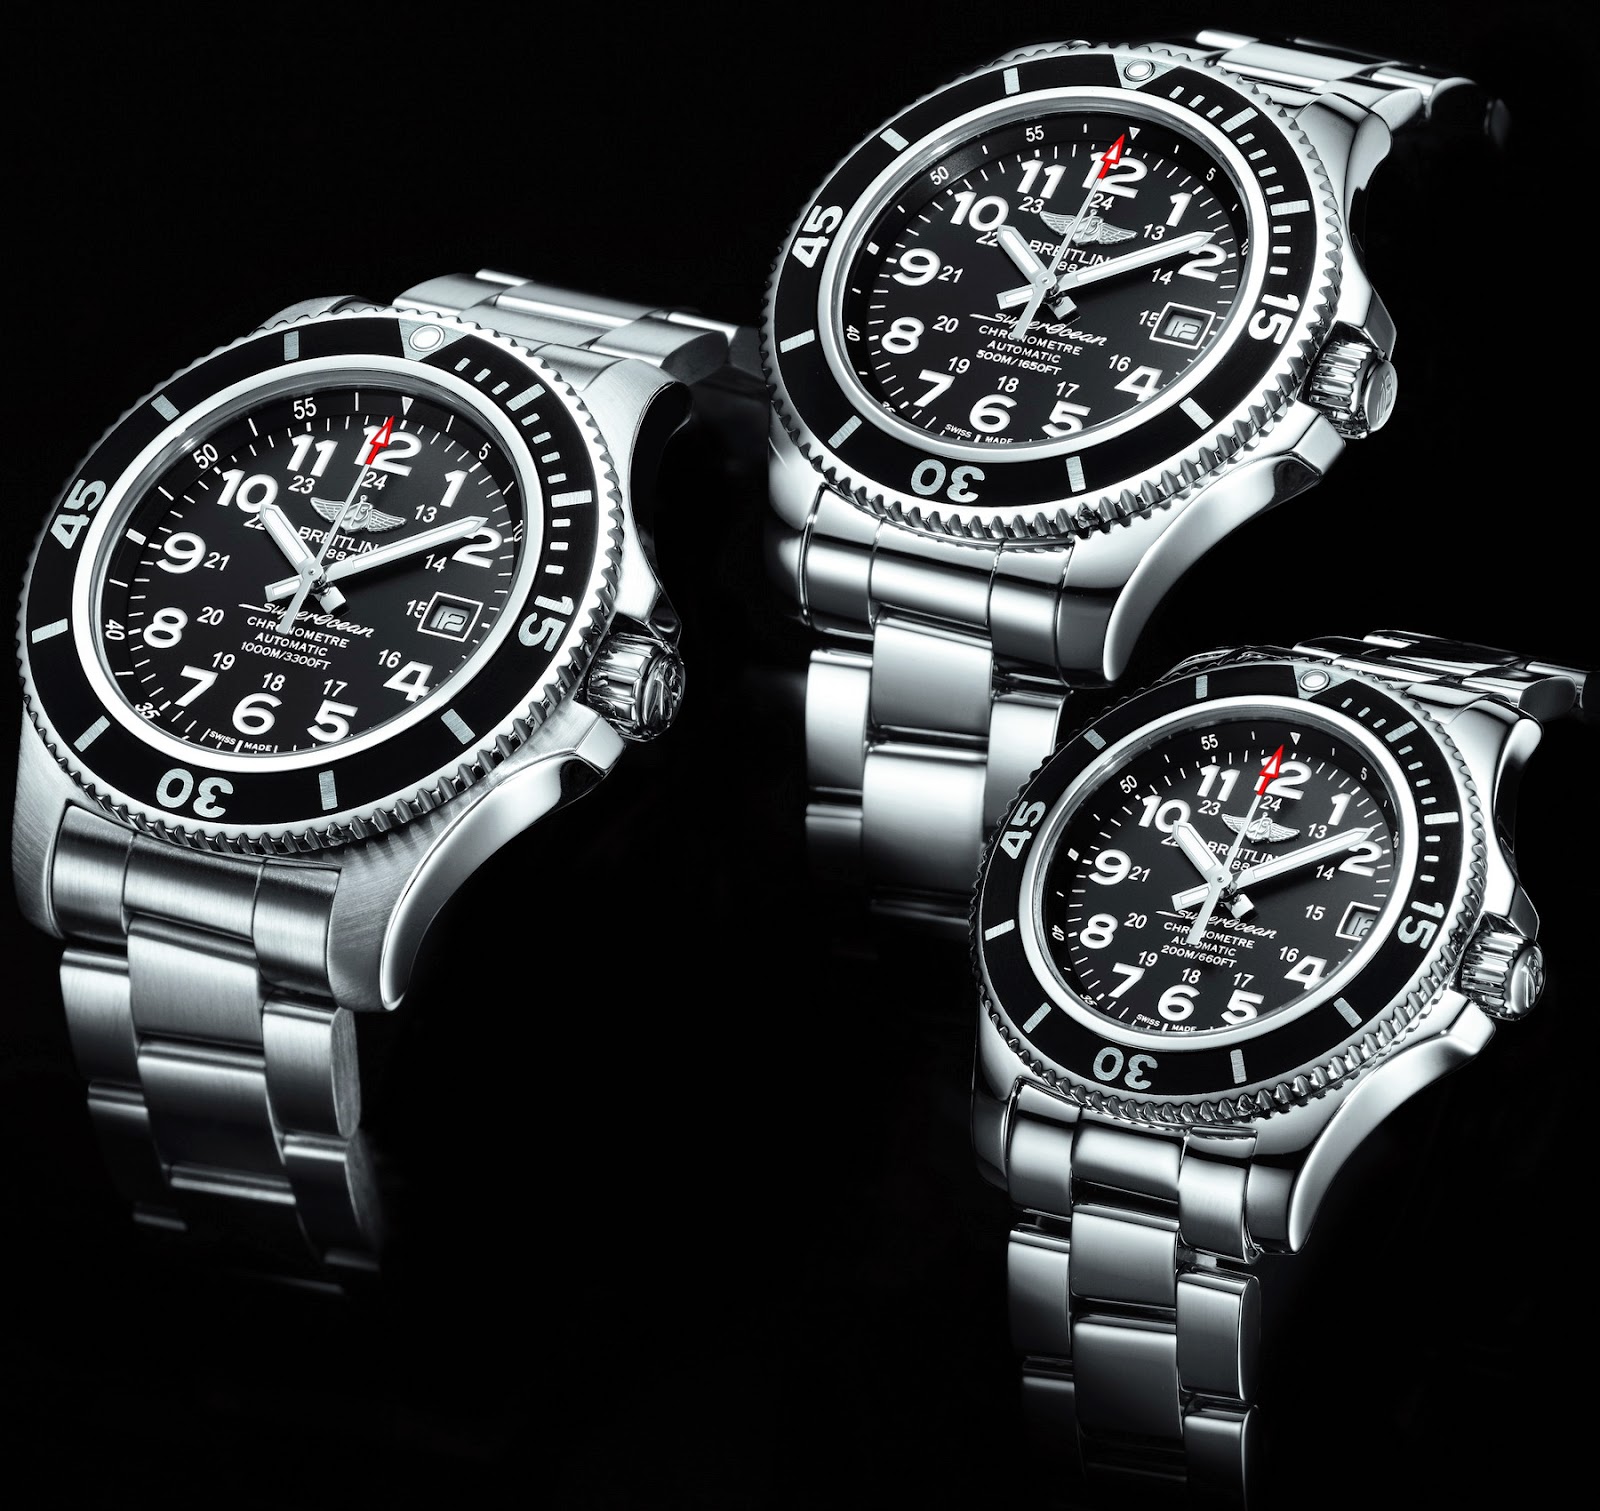 BREITLING Superocean II NEW 2015 collection